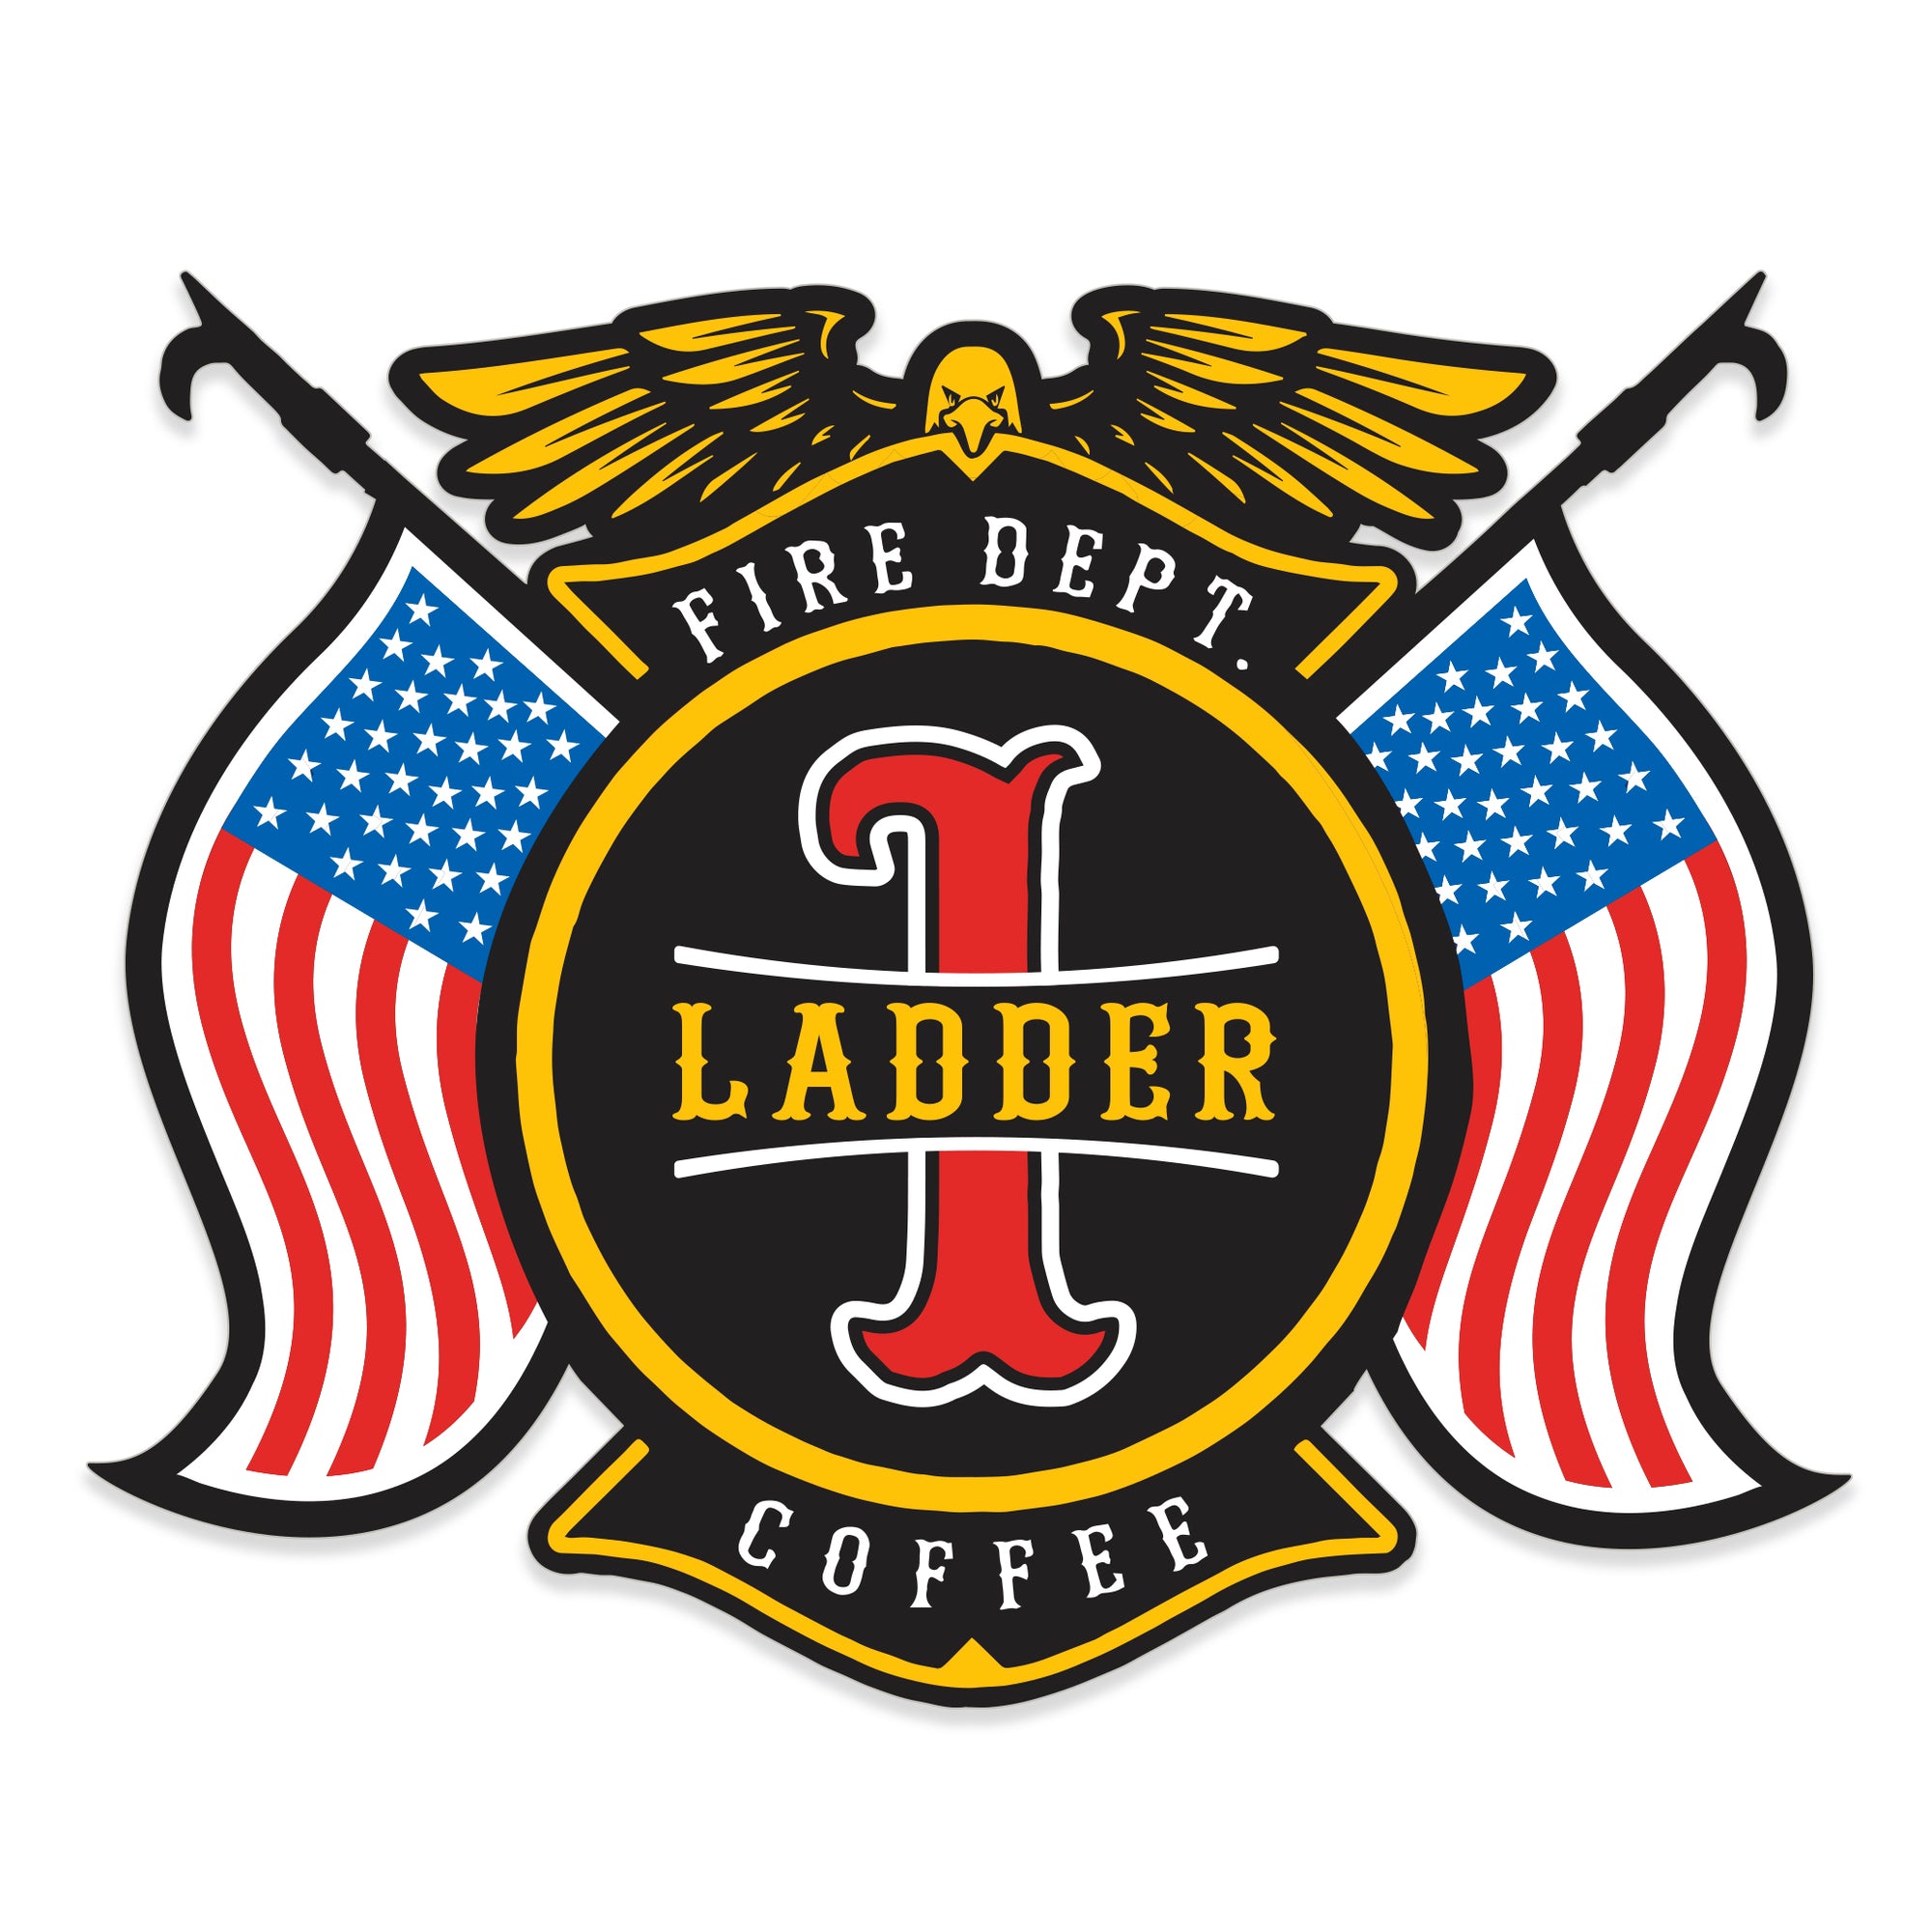 A maltese cross design with American flags on each side, a golden eagle on top and text that reads "Ladder 1" in the center.